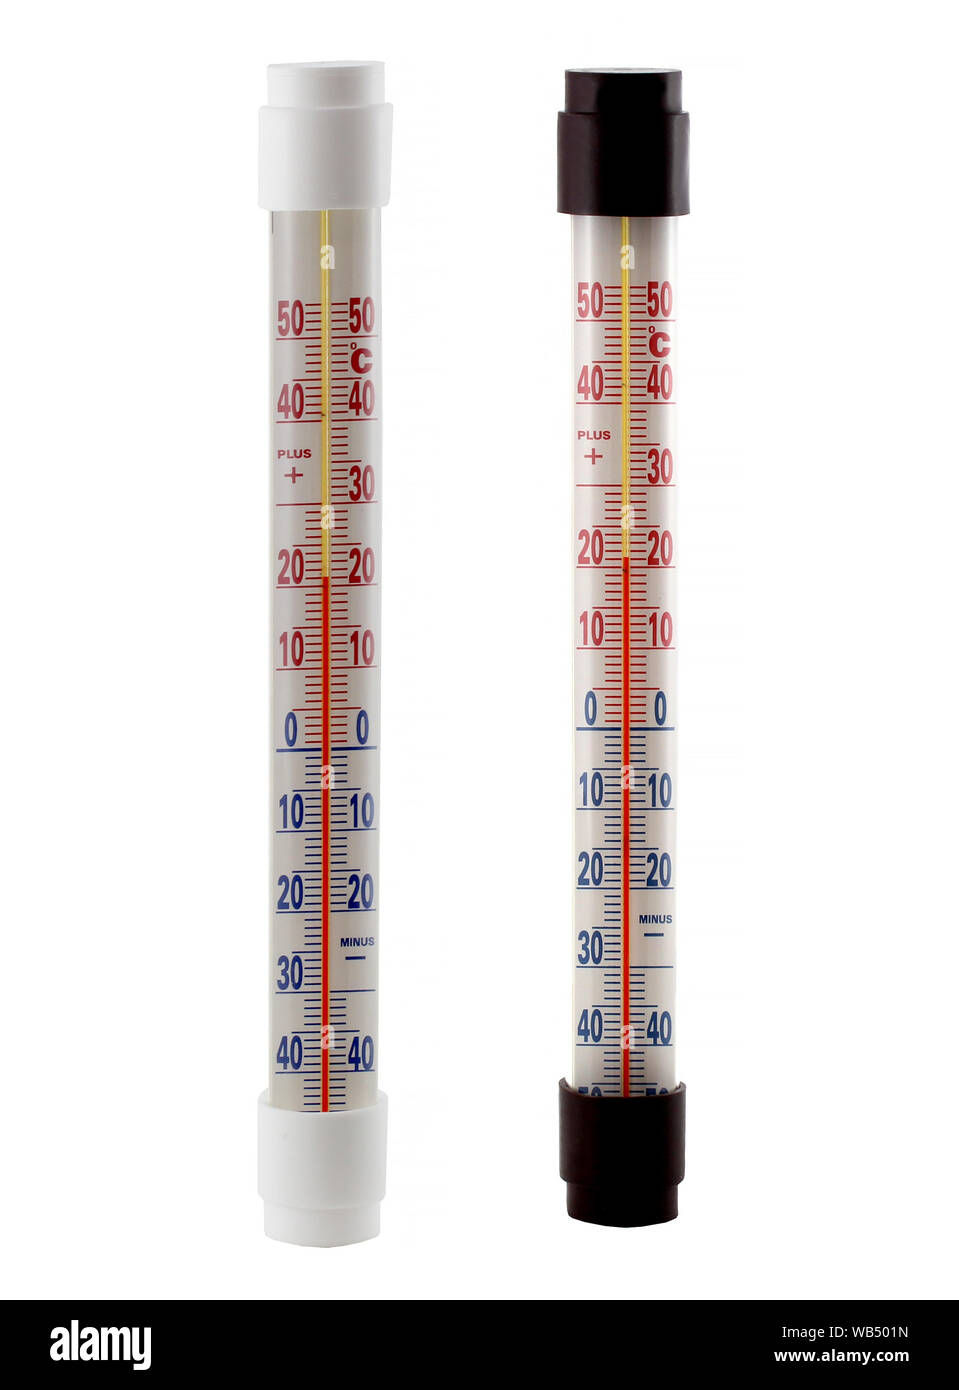 Outdoor thermometer on the white background in white and black colour. They show a temperature of 21 degrees. Stock Photo